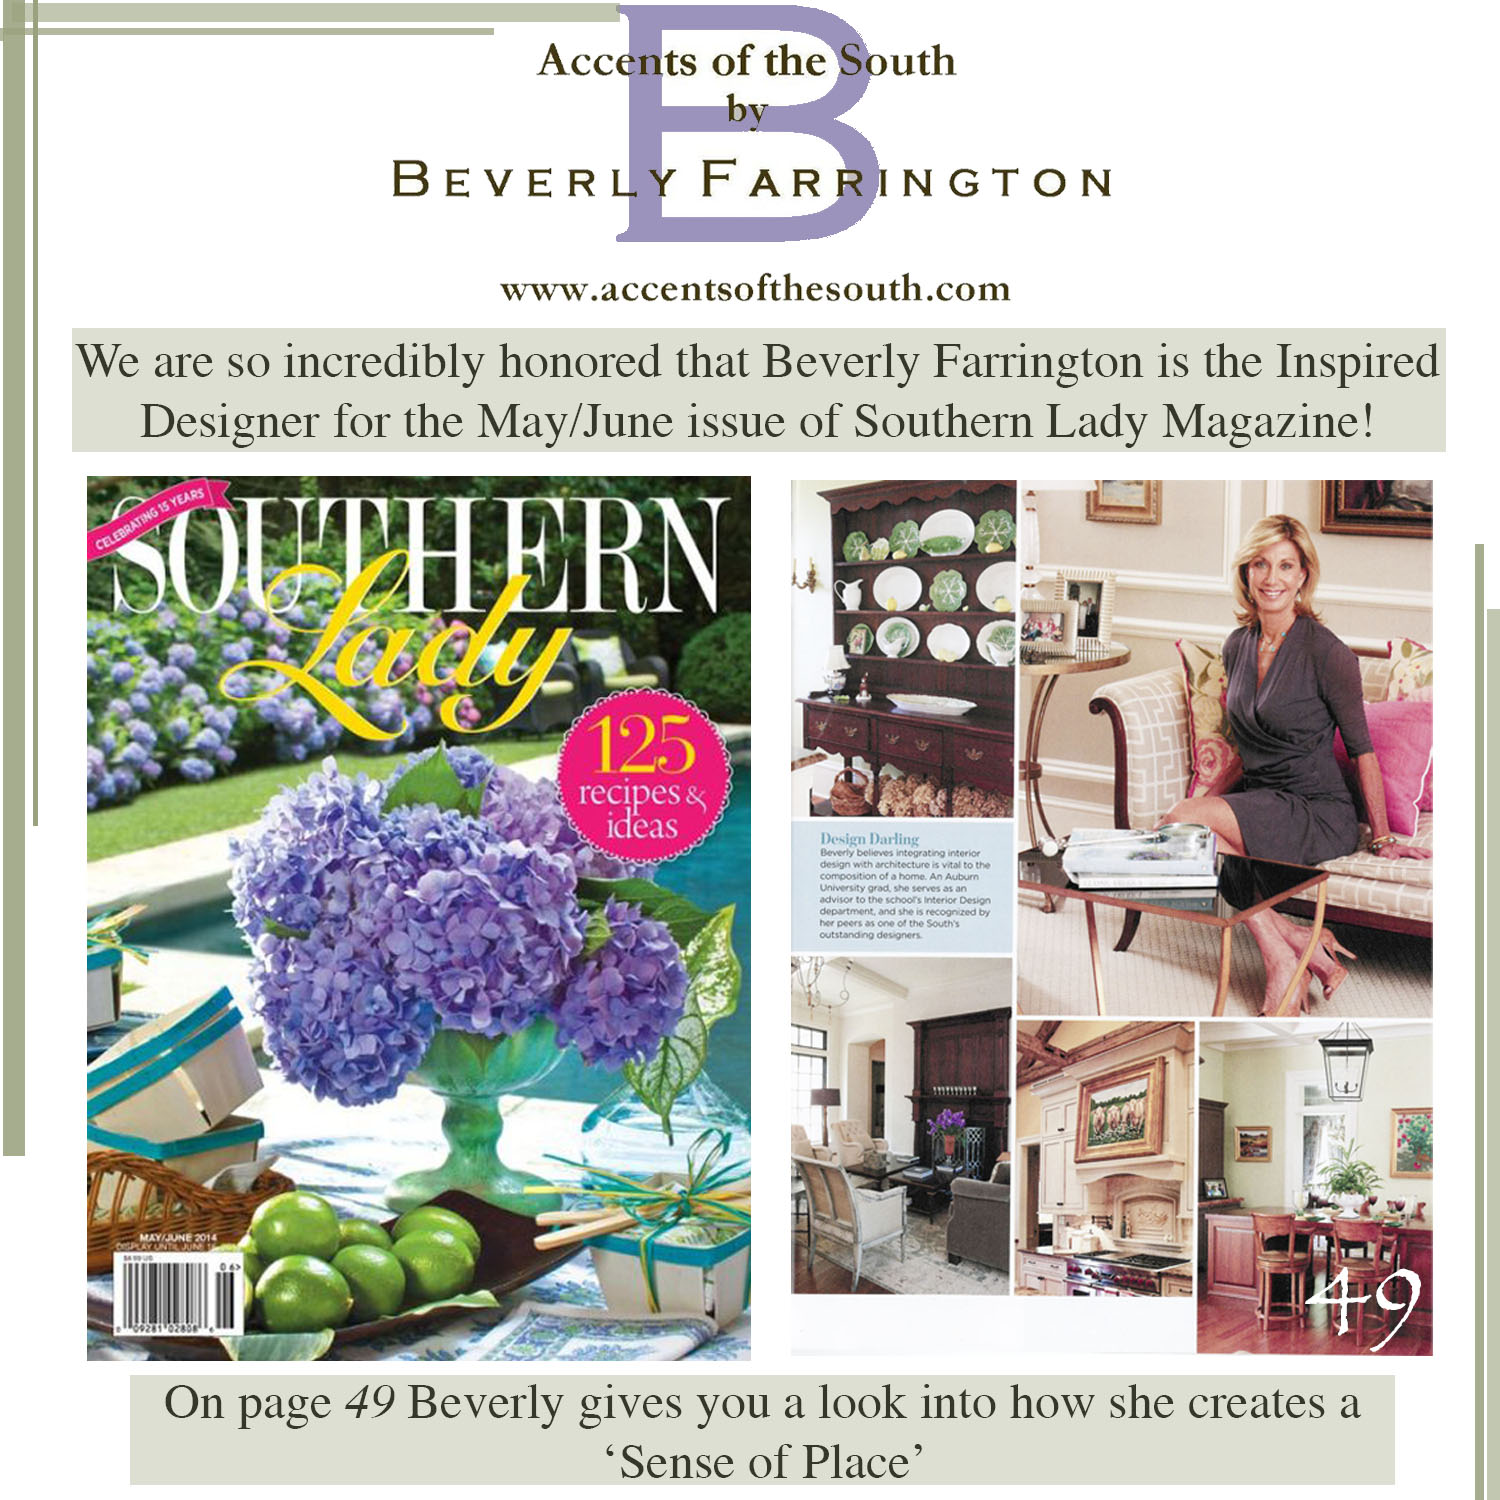 Accents of the South by Beverly Farrington - Huntsville Interior Design - whats_new_1stpage Huntsville Alabama Interior Designer Beverly Farrington and Southern Lady %